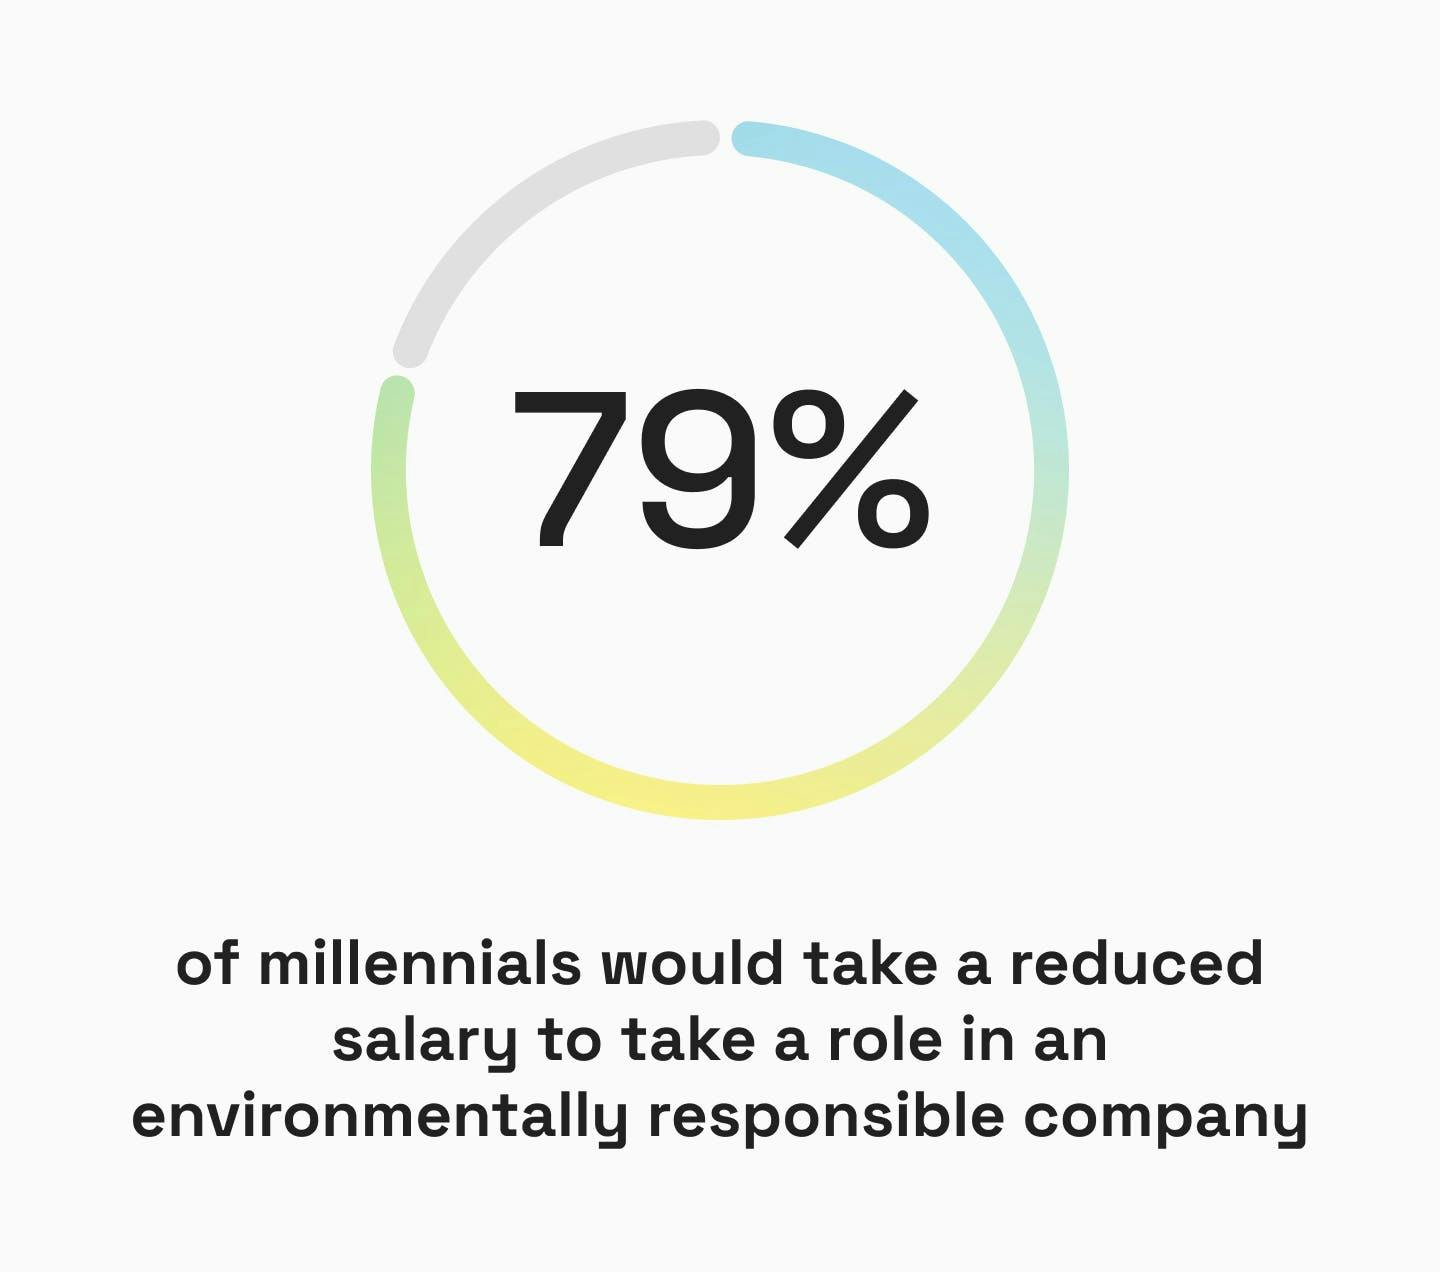 79% of millennials would take a reduced salary to take a role in an environmentally responsible company